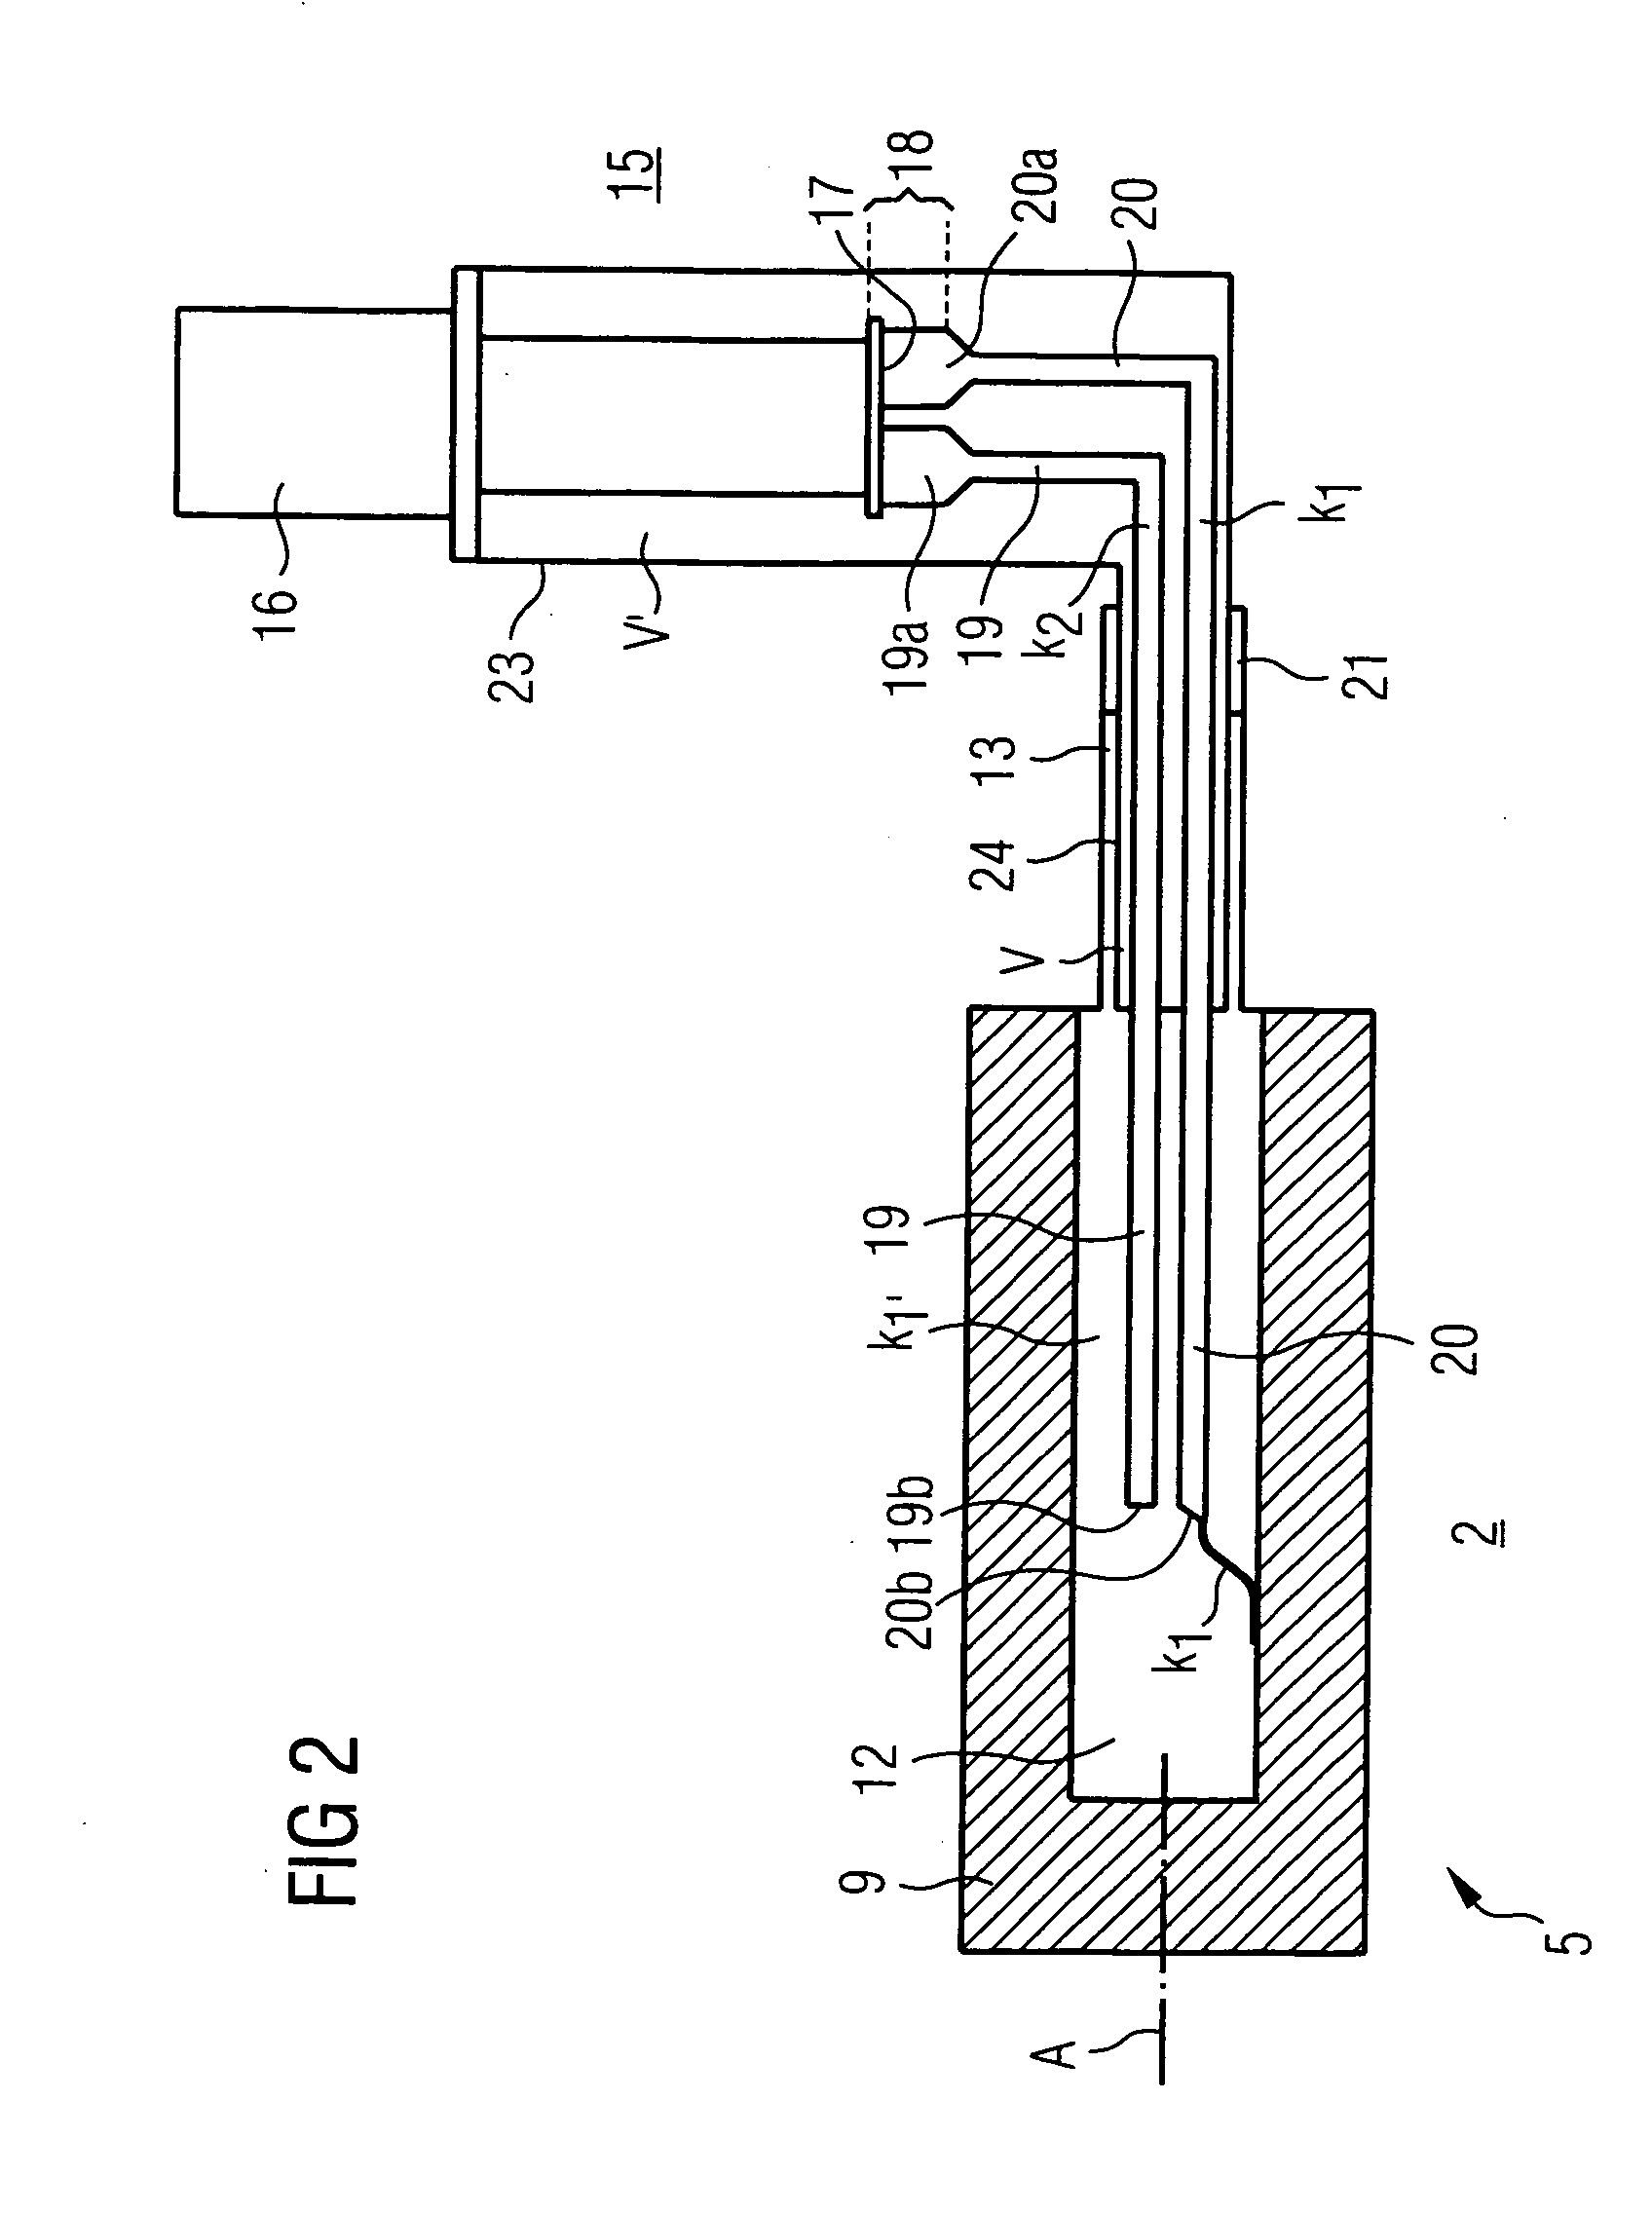 Superconductive device comprising a refrigeration unit, equipped with a refrigeration head that is thermally coupled to a rotating superconductive winding